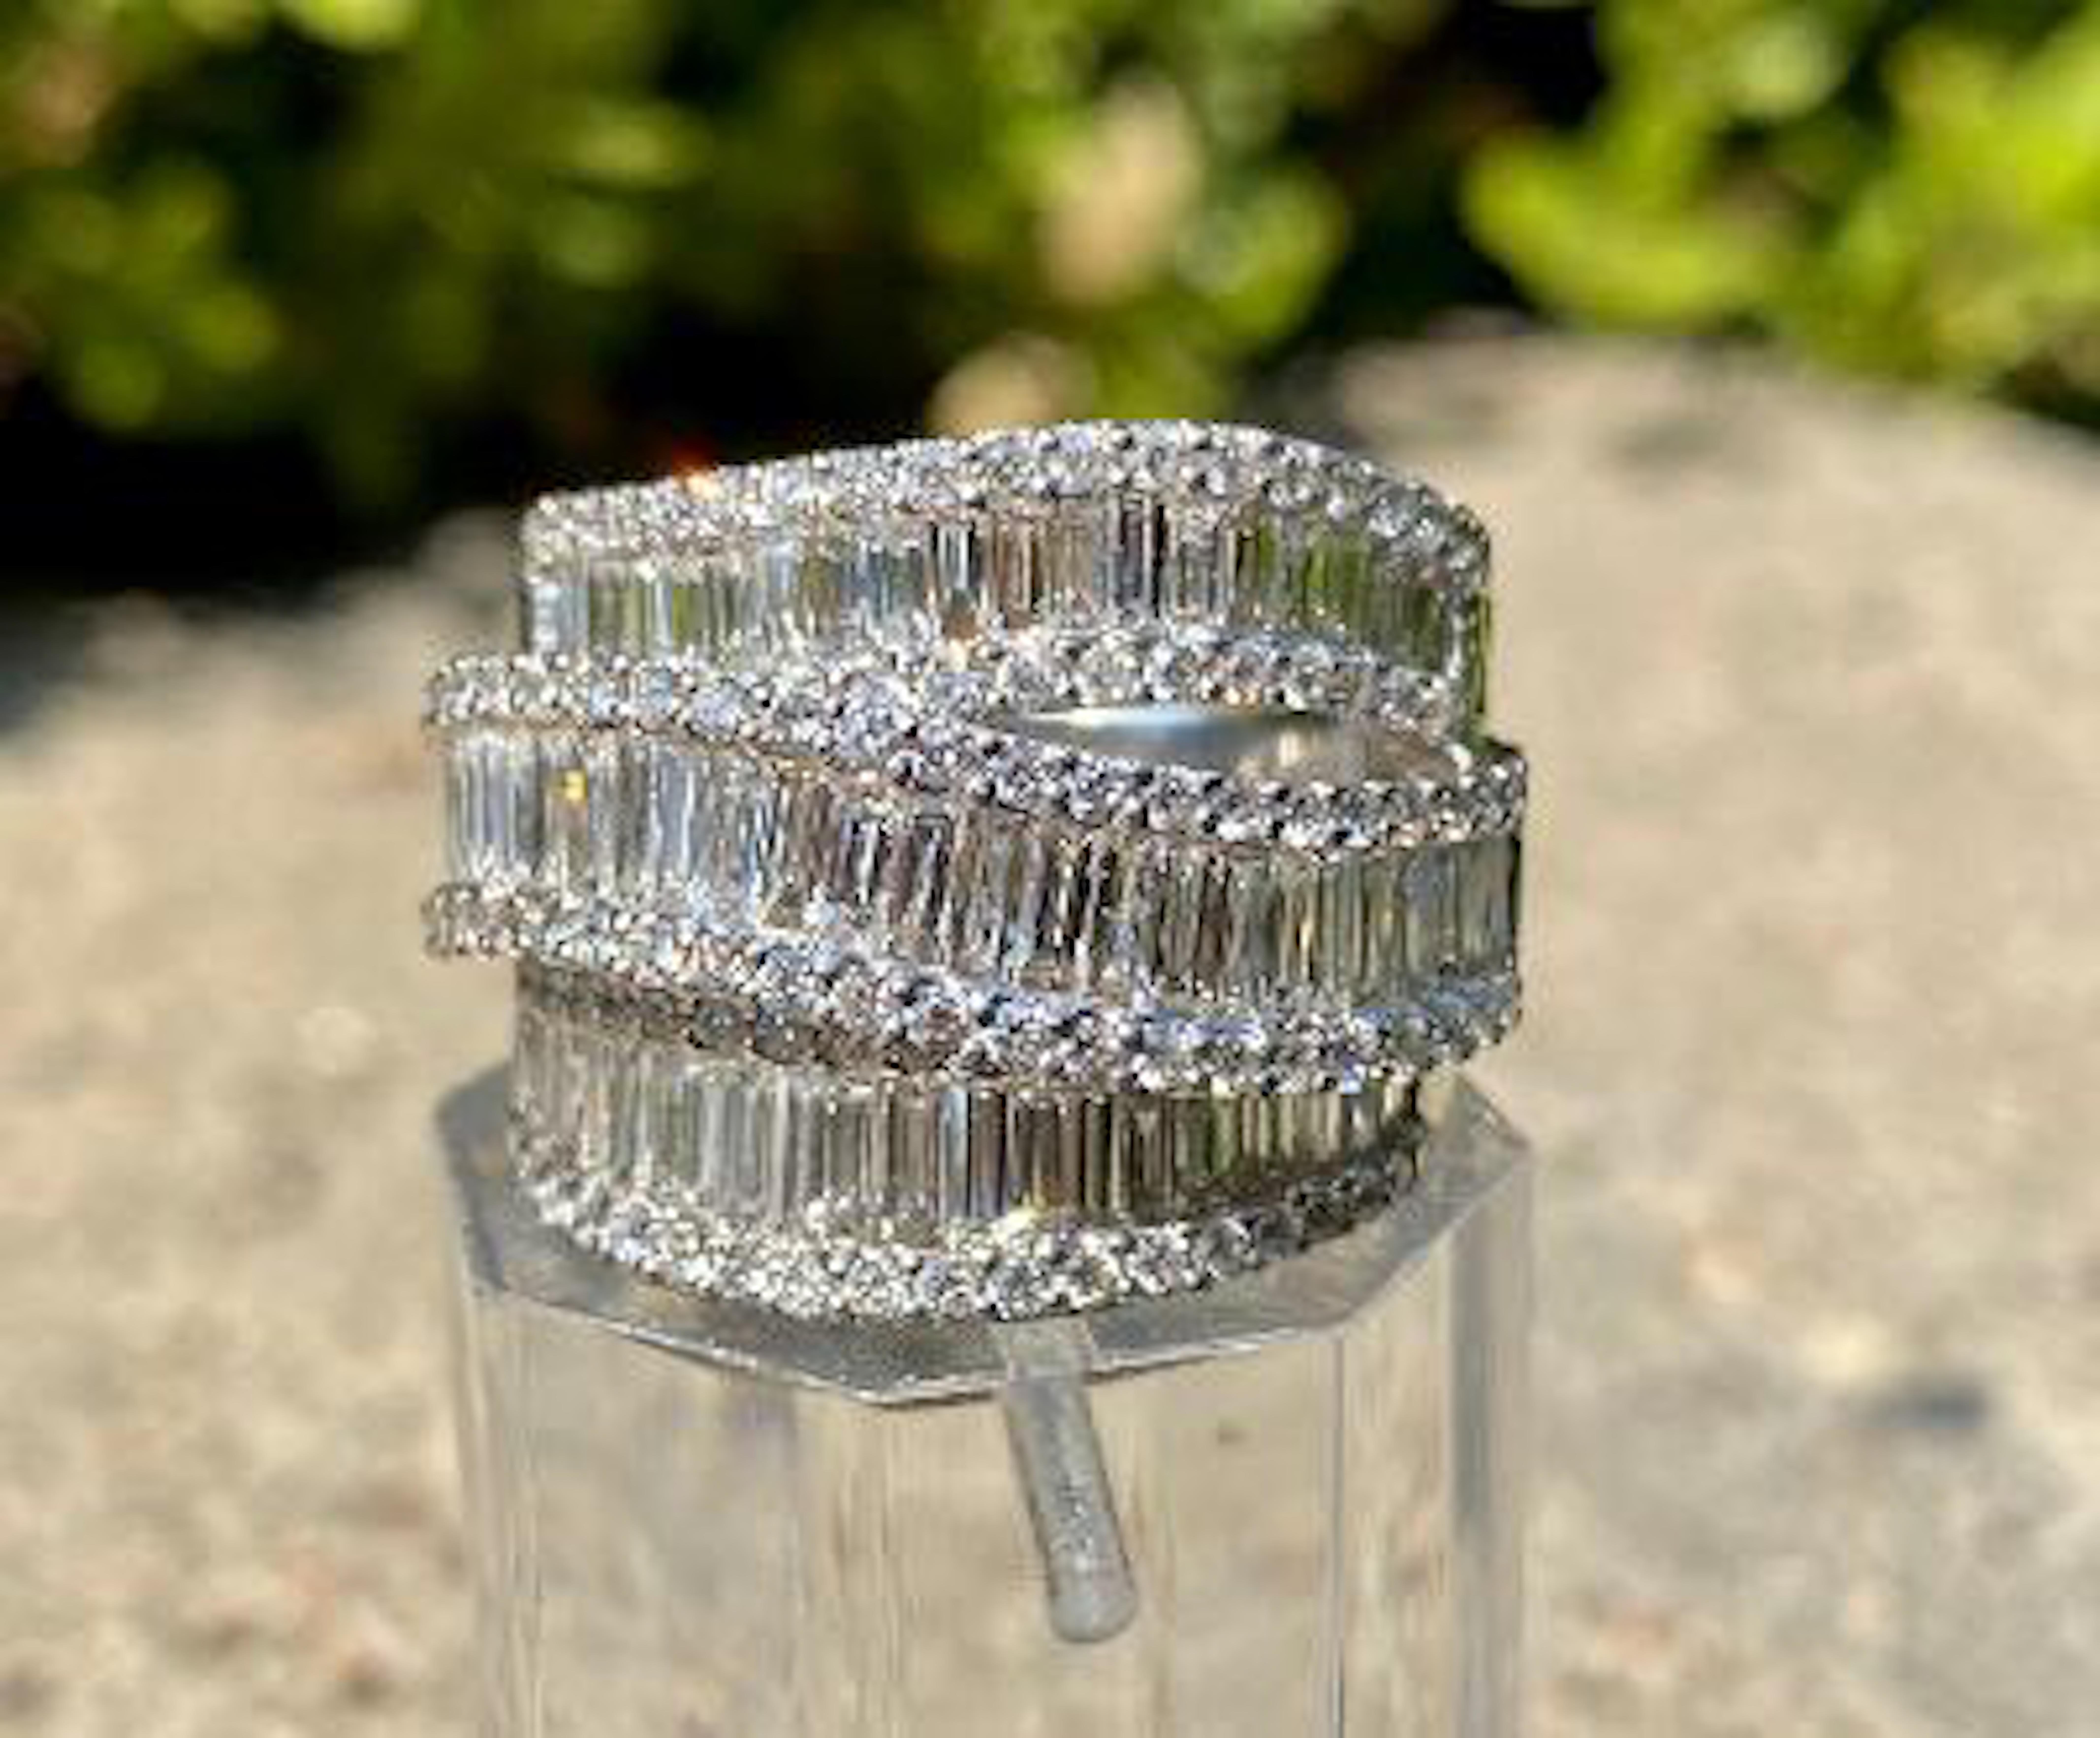 Very elegant and stunning, custom made 14 karat white gold, wide three row band ring features individual rows of sparkling white baguette cut diamonds invisibly set and separated by raised curving lines of prong set round brilliant diamonds creating